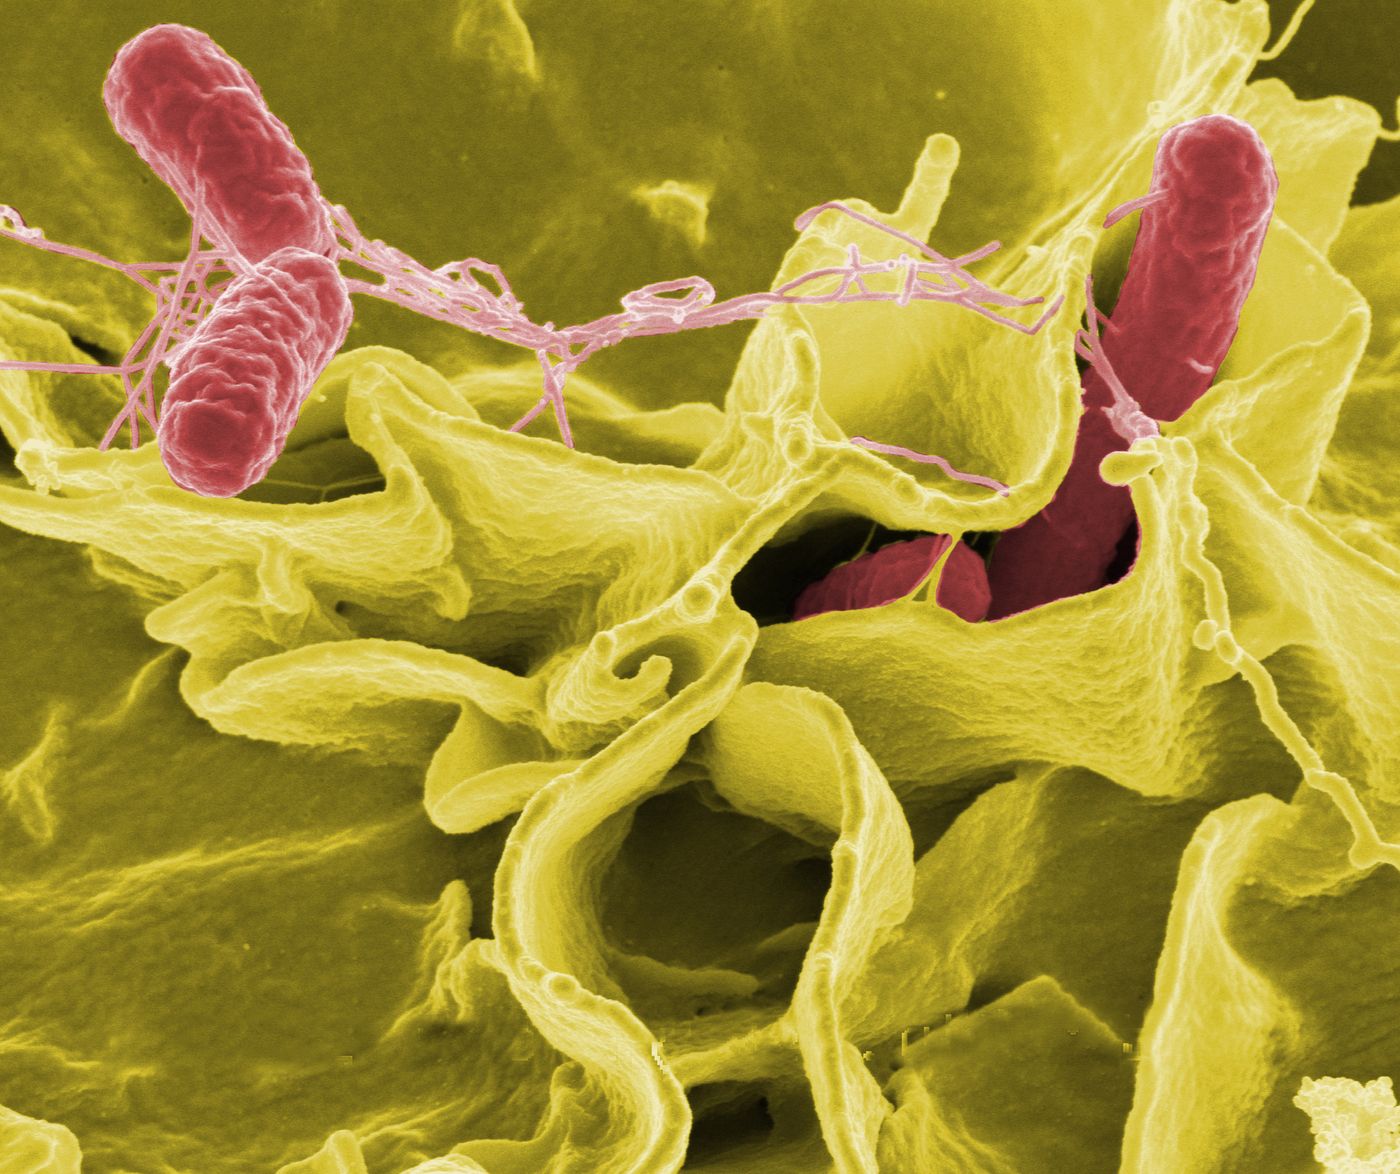 Salmonella is a leading cause of childhood deaths in Africa.